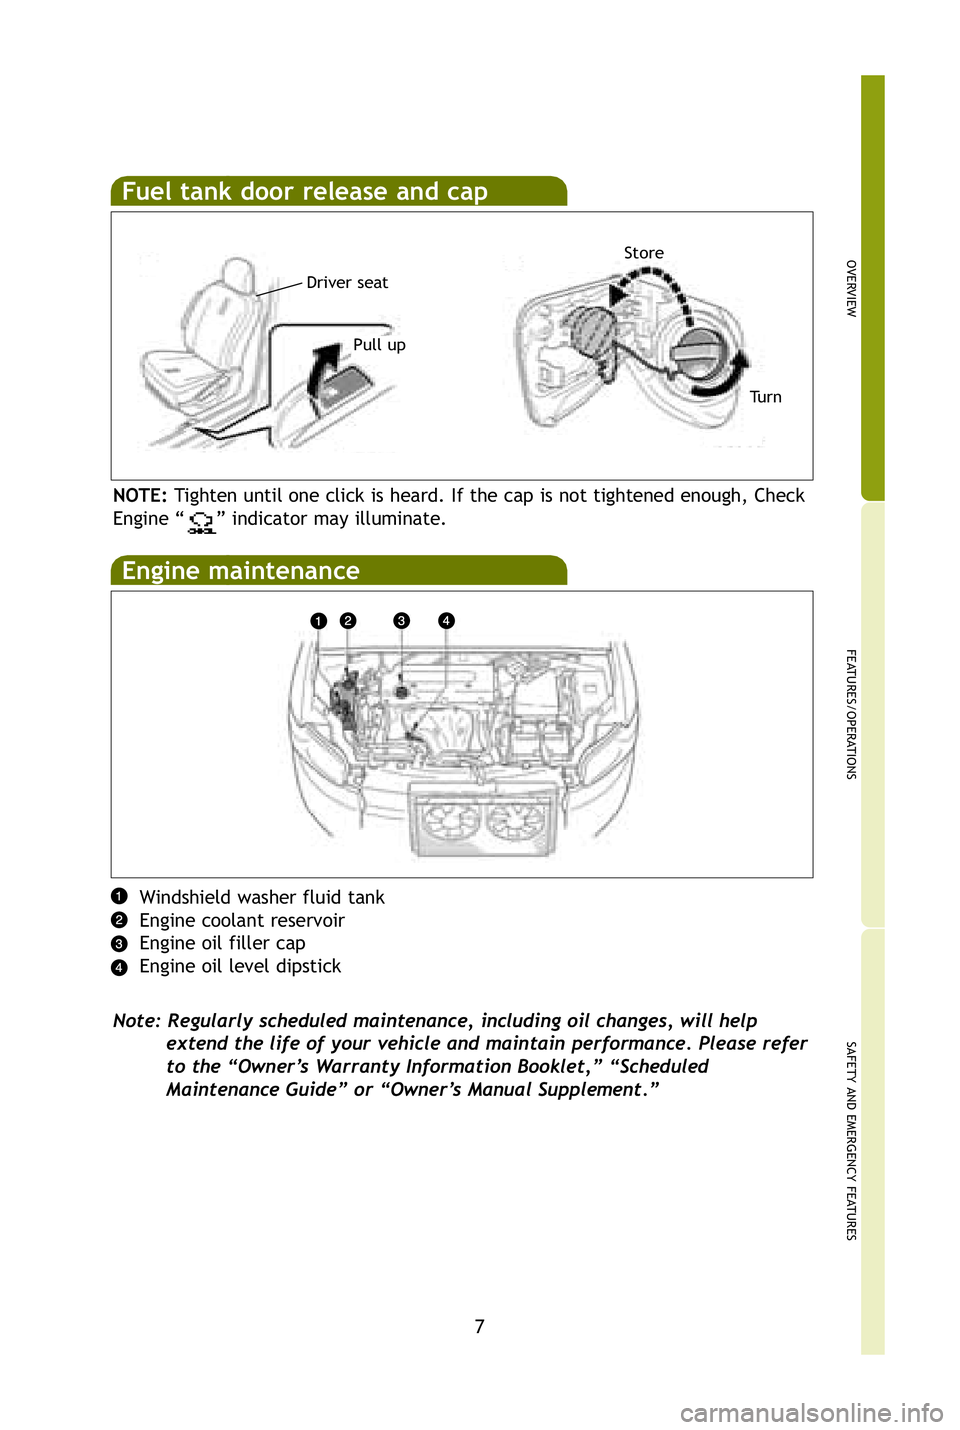 TOYOTA xB 2009  Owners Manual (in English) 7
OVERVIEW
FEATURES/OPERATIONS
SAFETY AND EMERGENCY FEATURES
Fuel tank door release and cap
Pull upStore
Tu r n
Windshield washer fluid tank
Engine coolant reservoir
Engine oil filler cap
Engine oil l